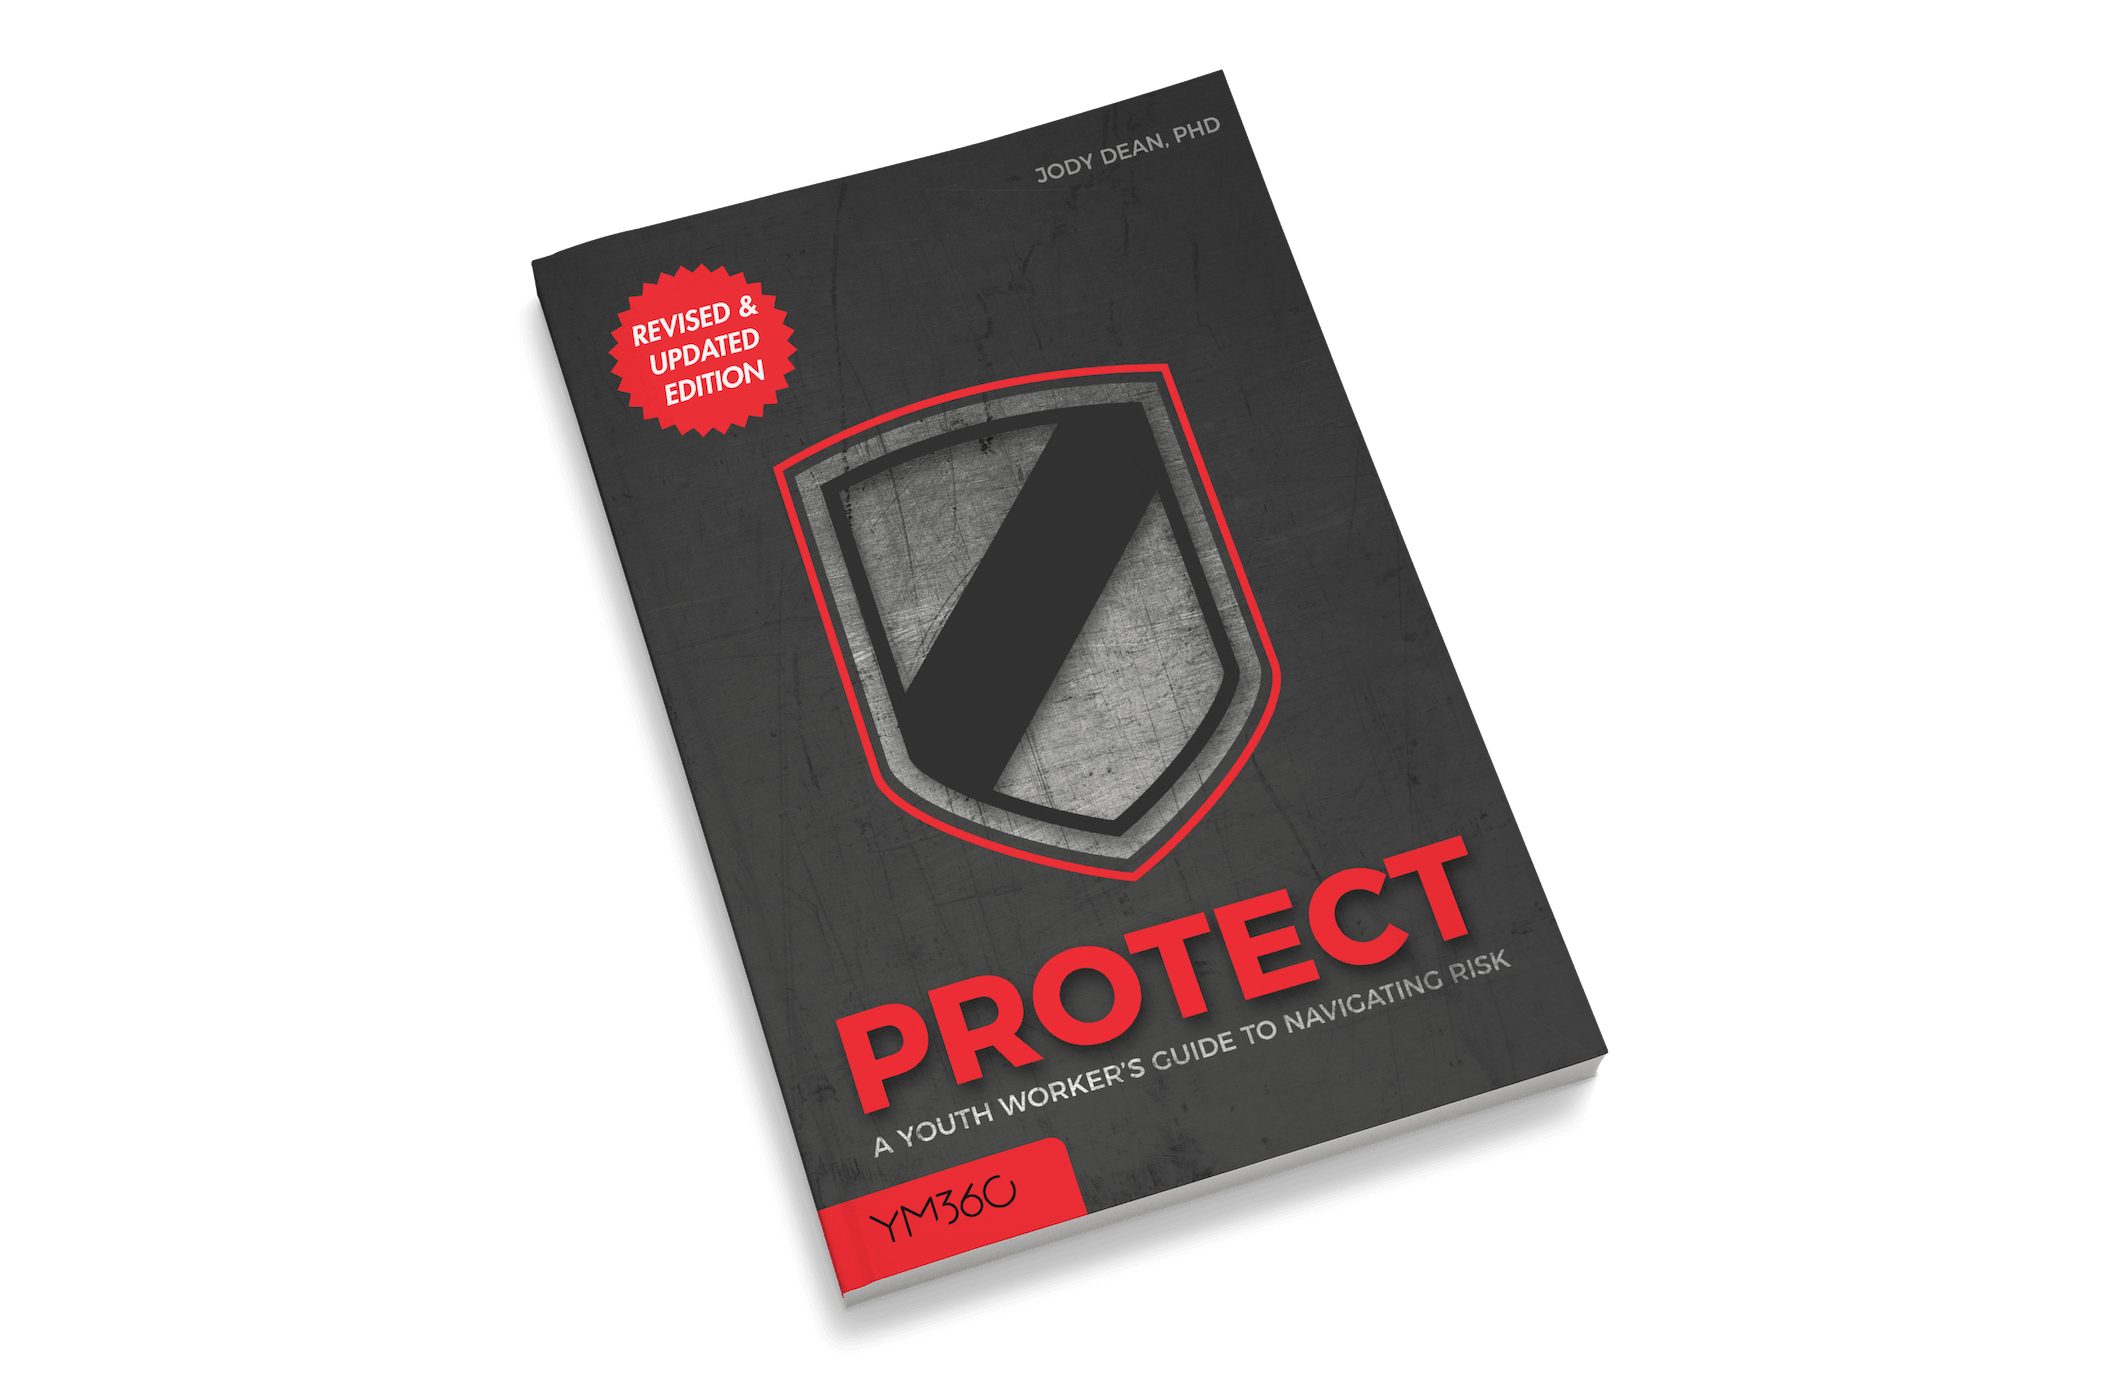 Protect: A Youth Worker's Guide to Navigating Risk (Revised & Updated Edition)